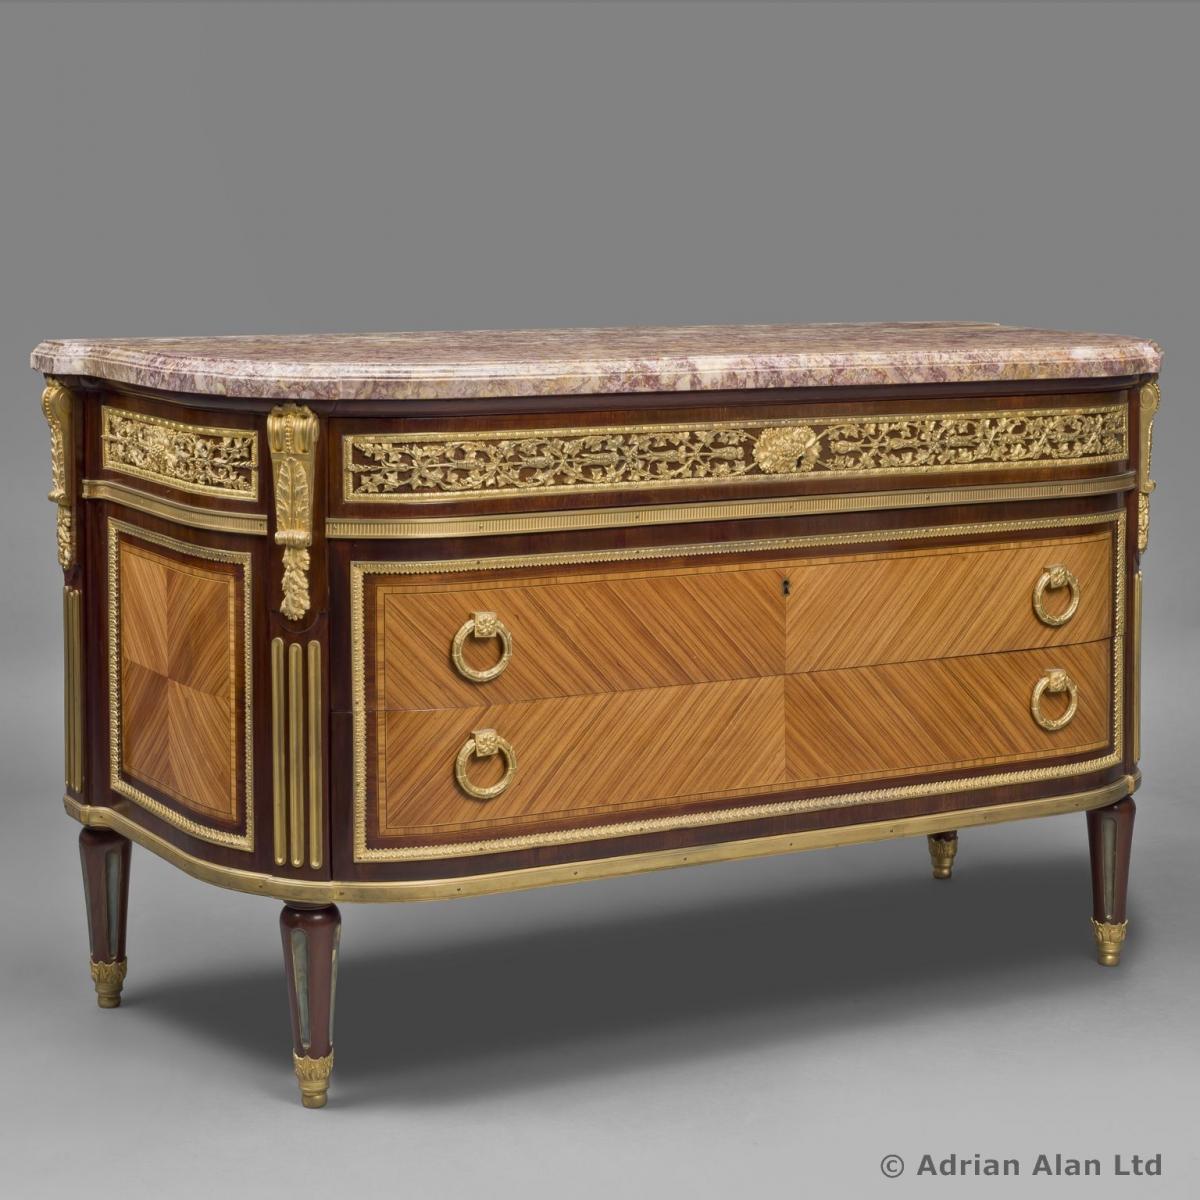 A Louis XVI Style Commode after a Model by Leleu ©AdrianAlanLtd